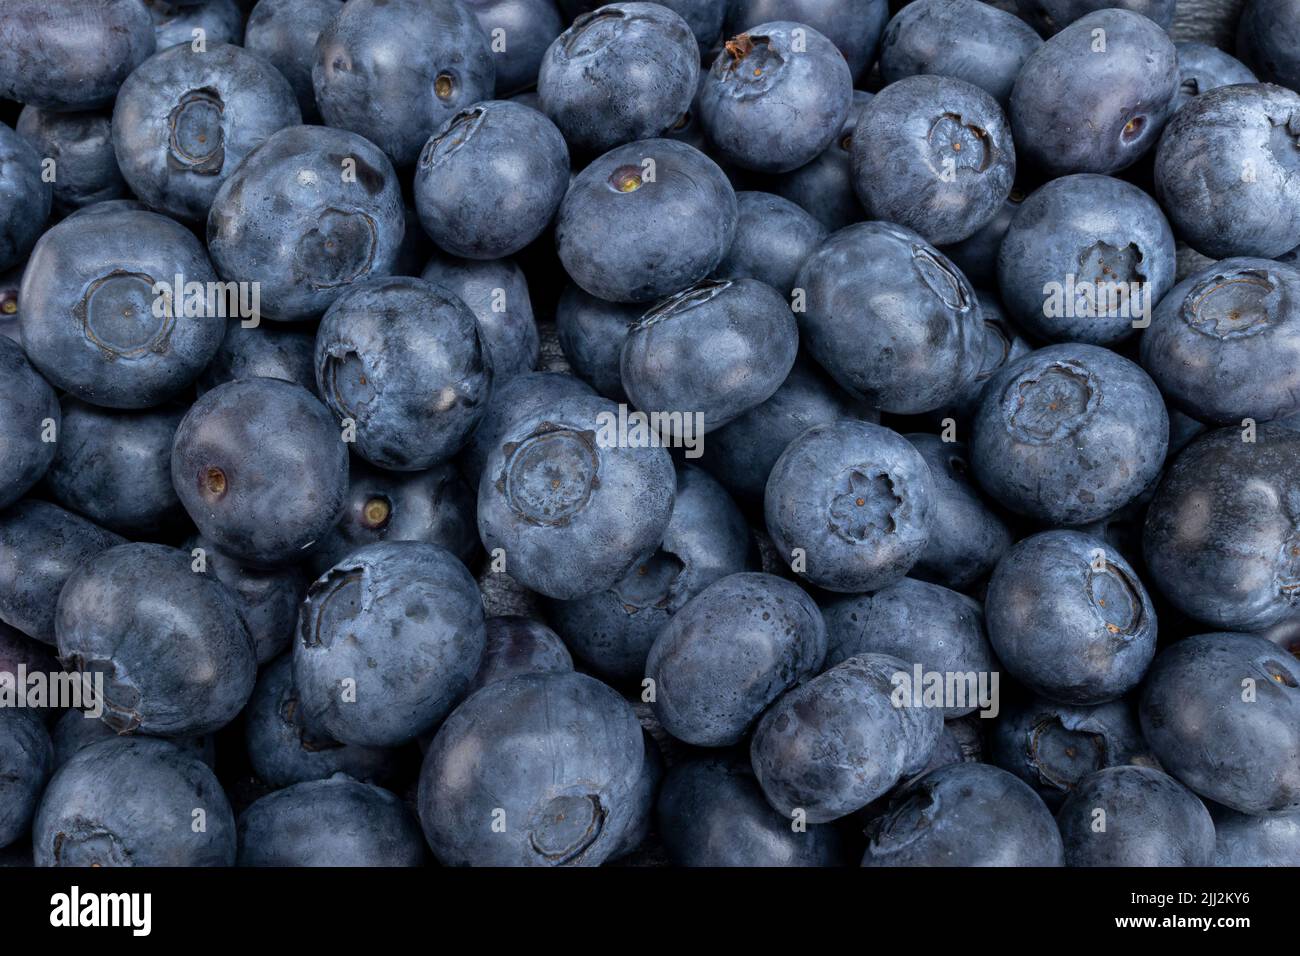 Fresh blueberry summer juicy fruits for a healthy diet. Organic blueberries for a healthy food and life concept. Stock Photo